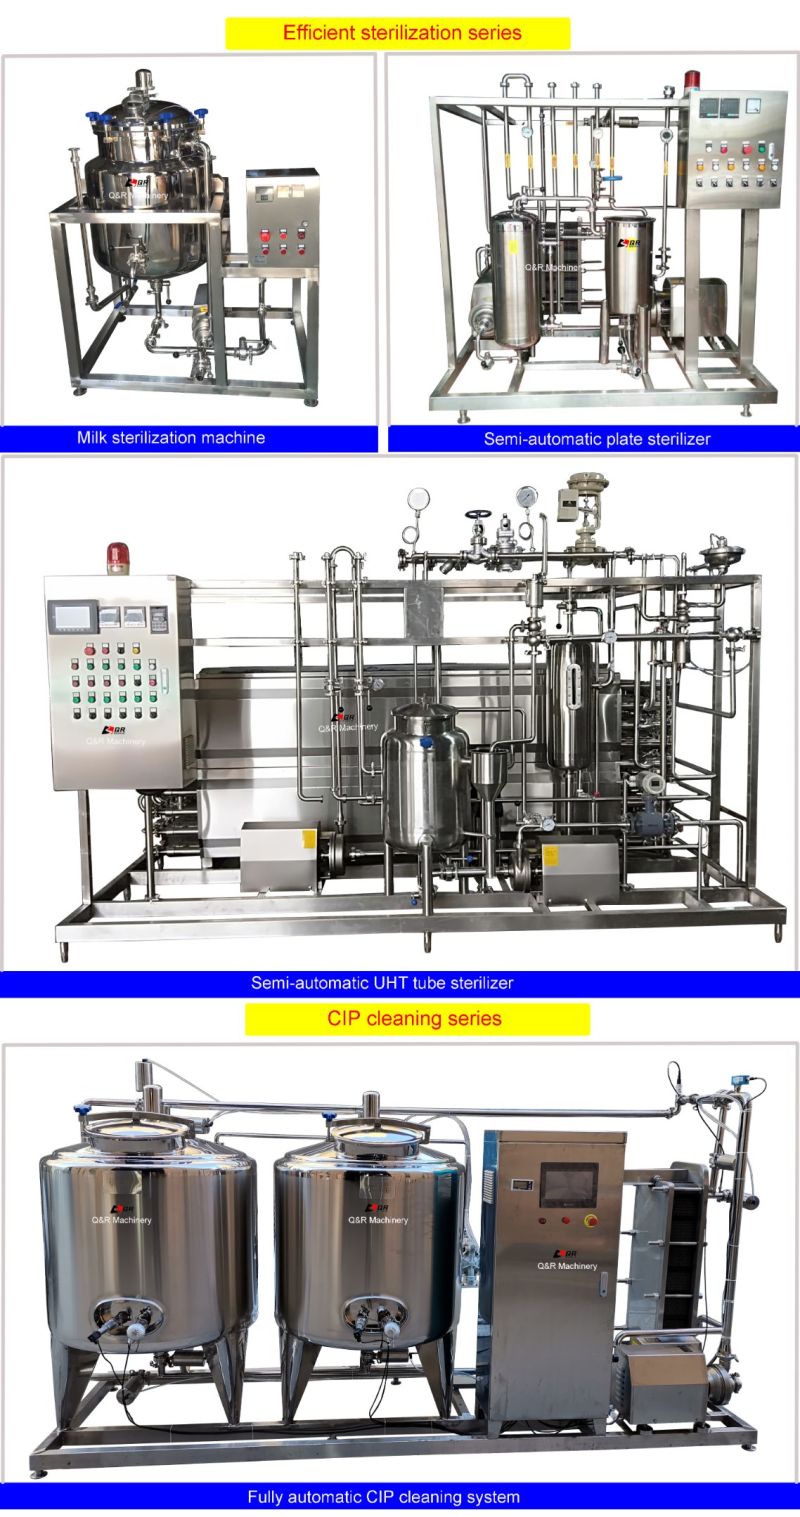 Factory Price 250 Gallon Stainless Steel Tomato Sauce Bean Paste Chemical Juice Dairy Mixing Reactor Tank